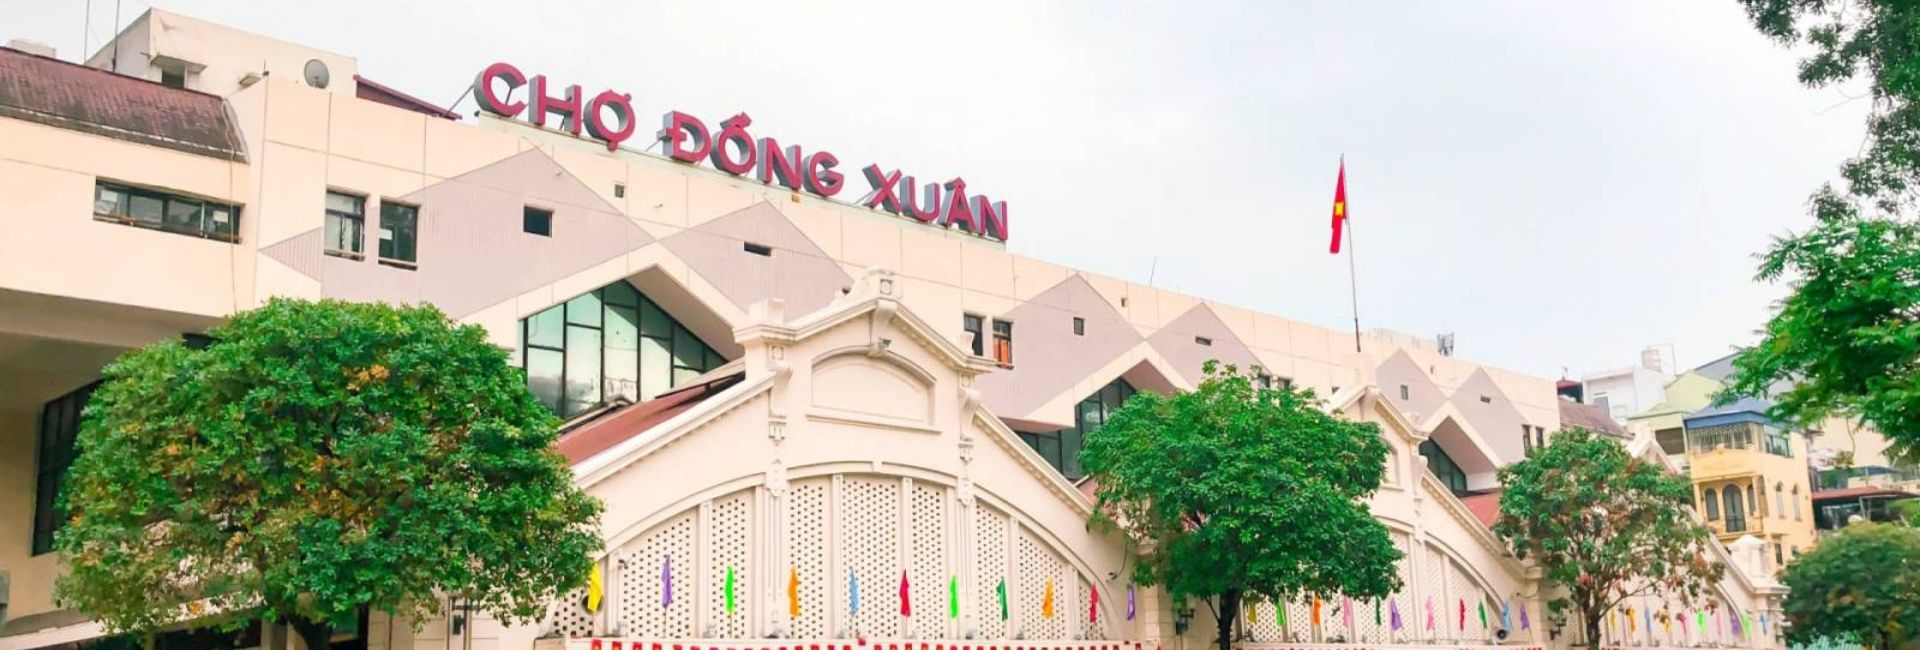 How to shop at Dong Xuan market? Is it worth visiting?